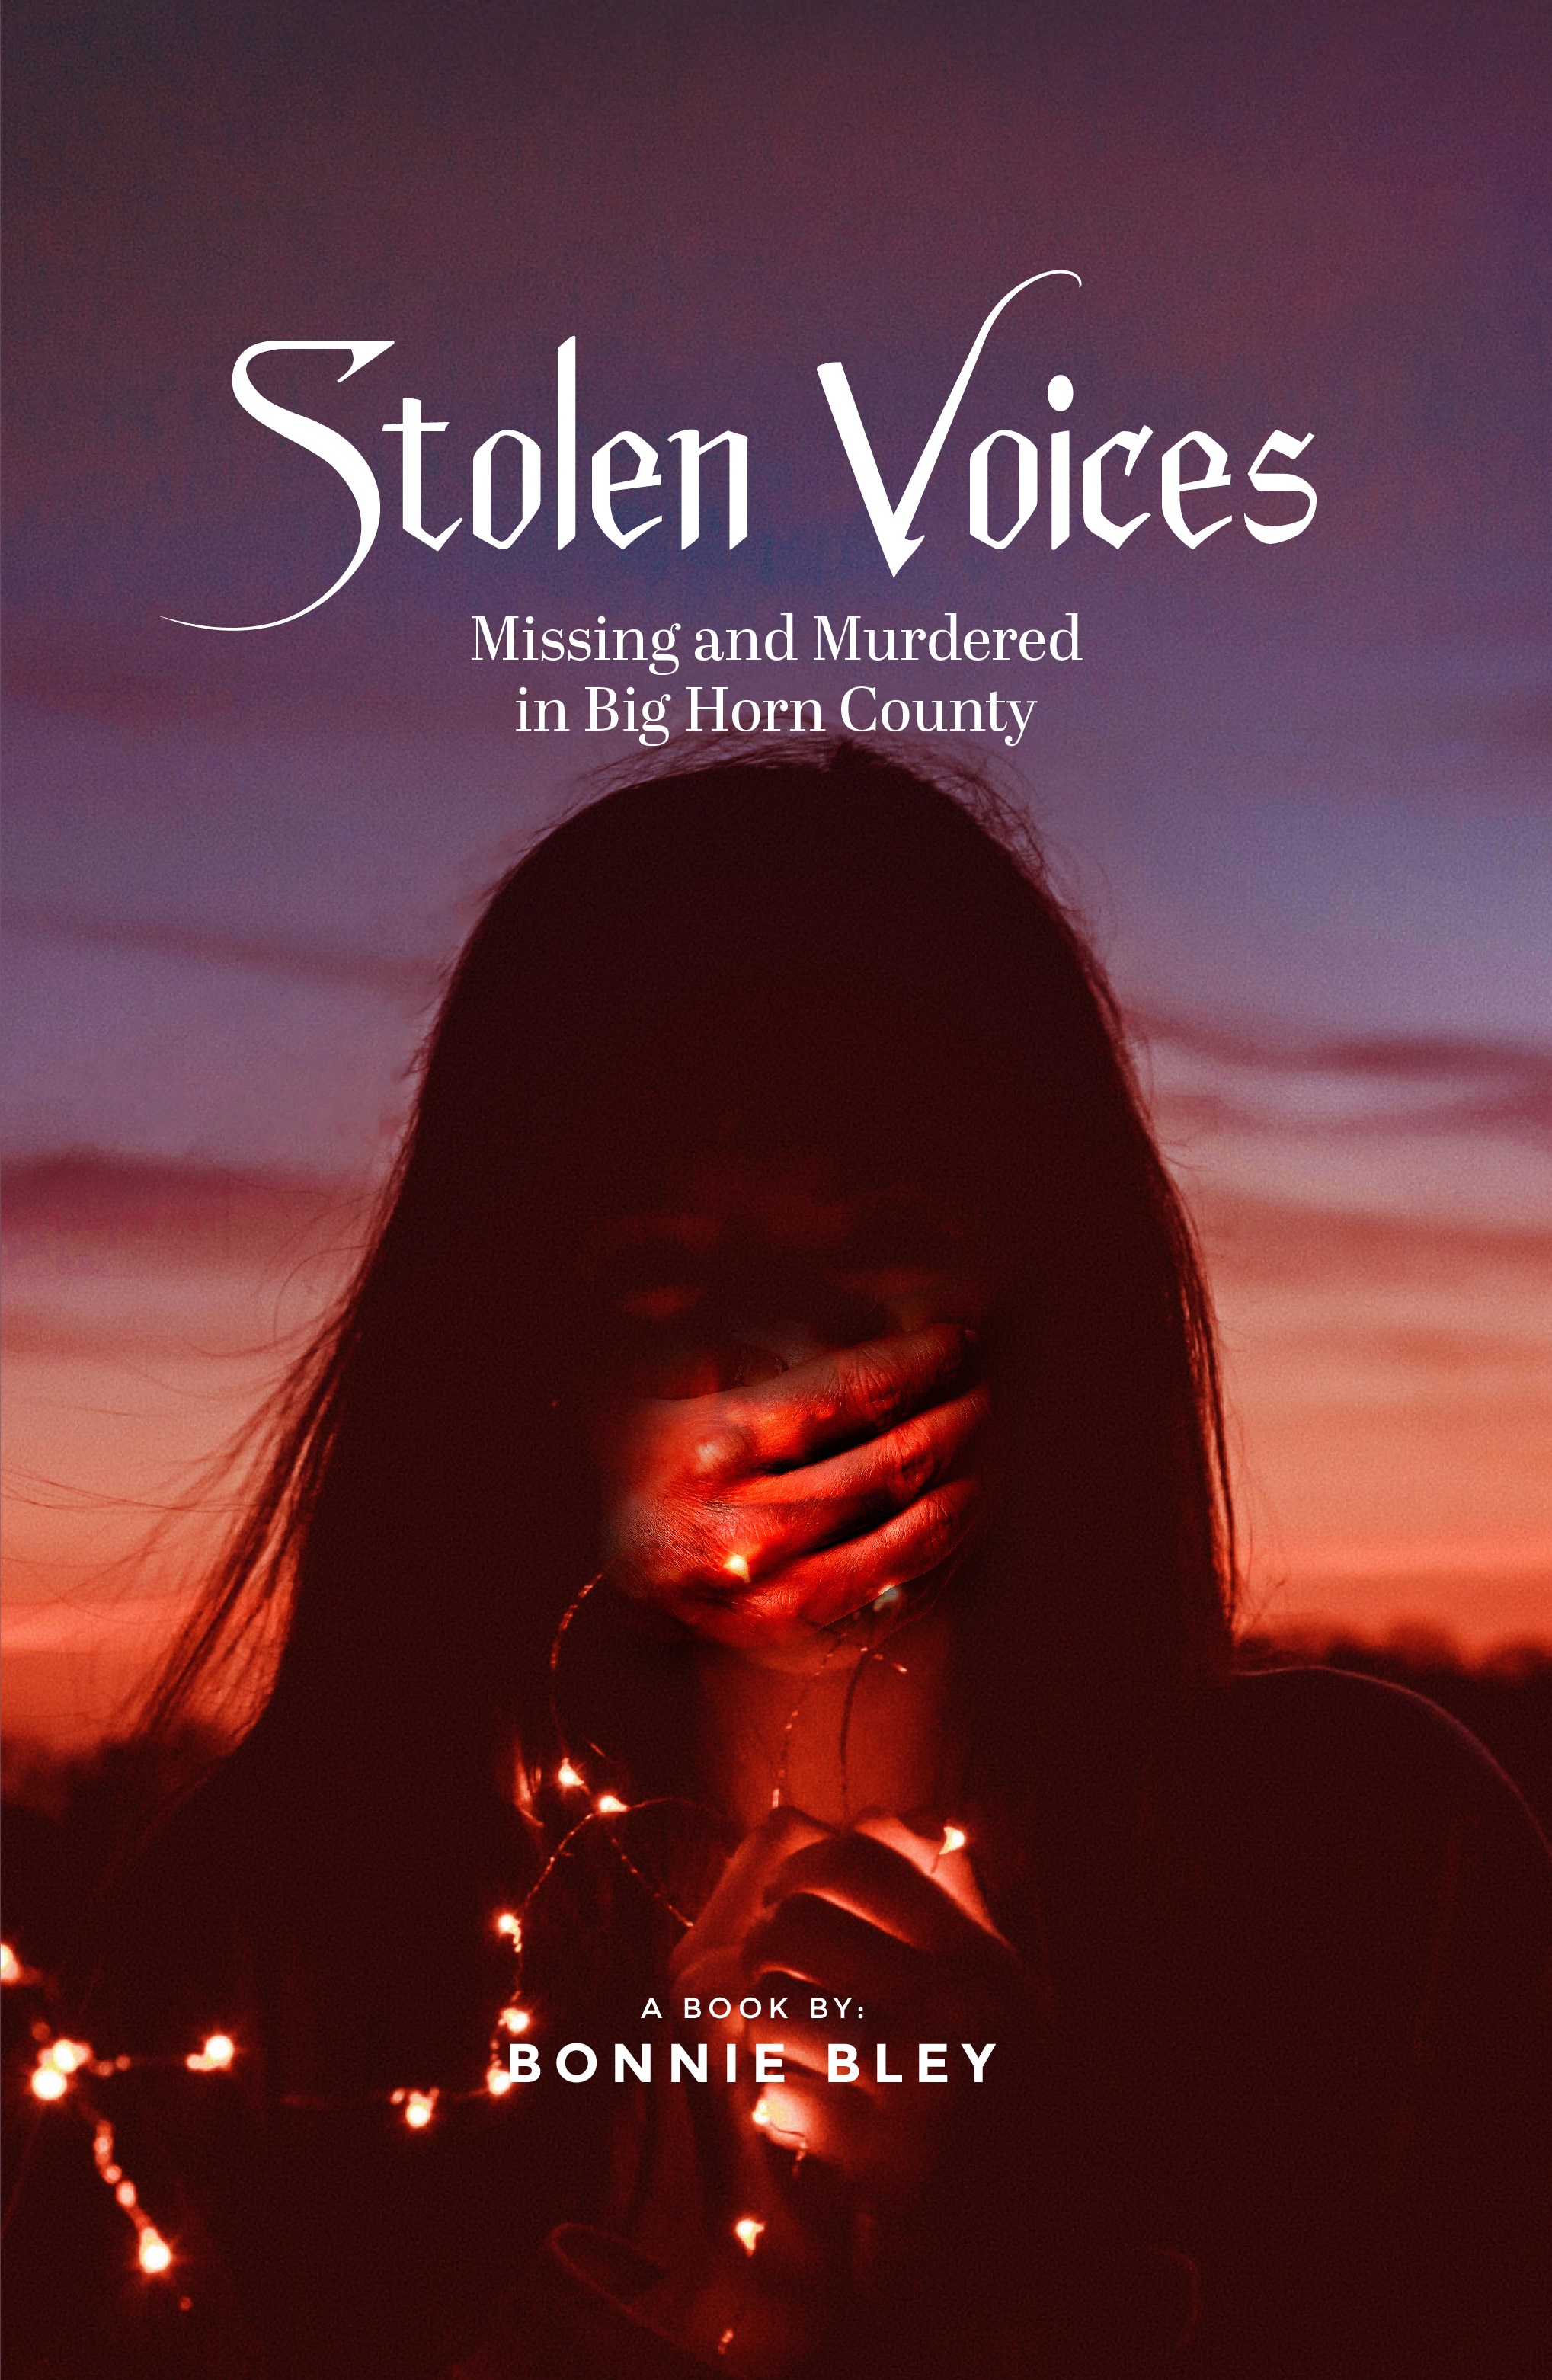 Bonnie Bley Shares Powerful Exposé on the Tragic Plight of Missing and Murdered Indigenous Women in Big Horn County